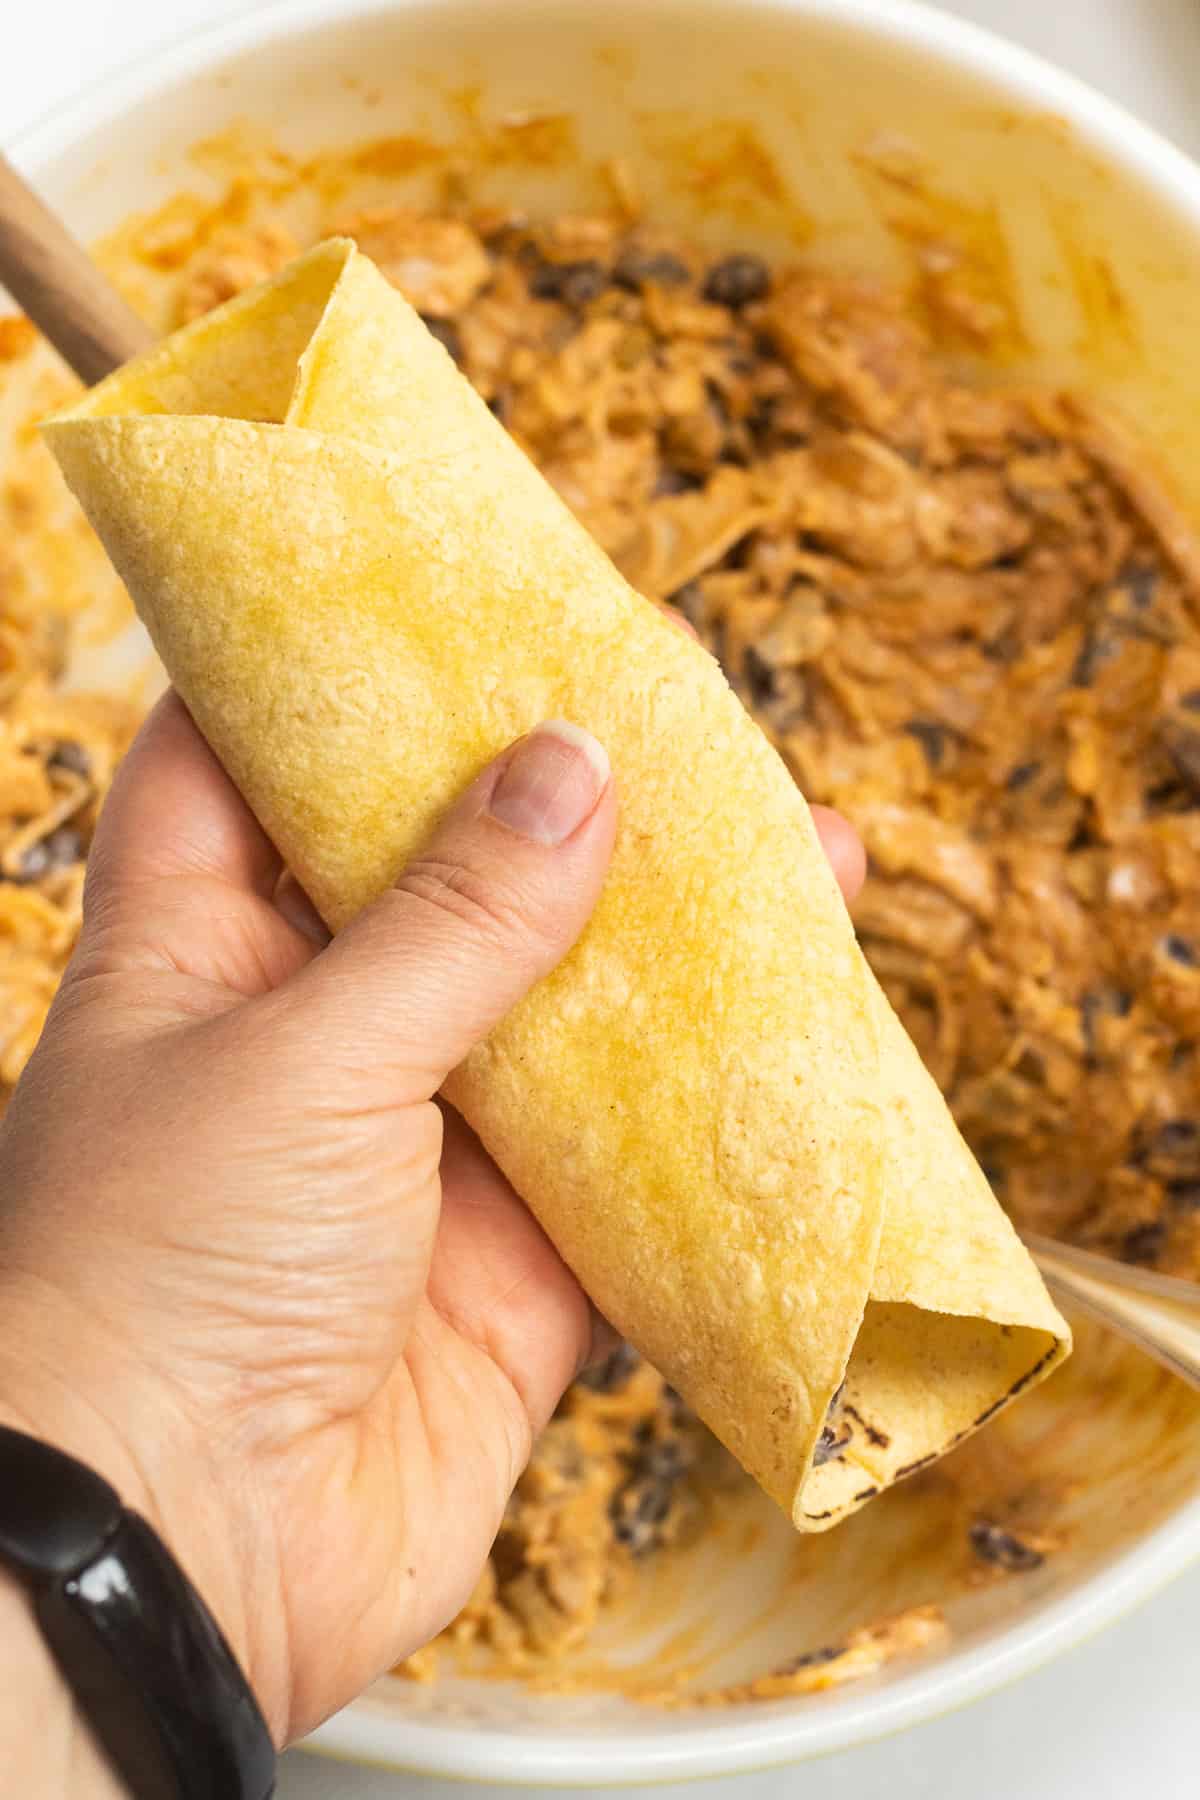 A rolled up enchilada in a hand.